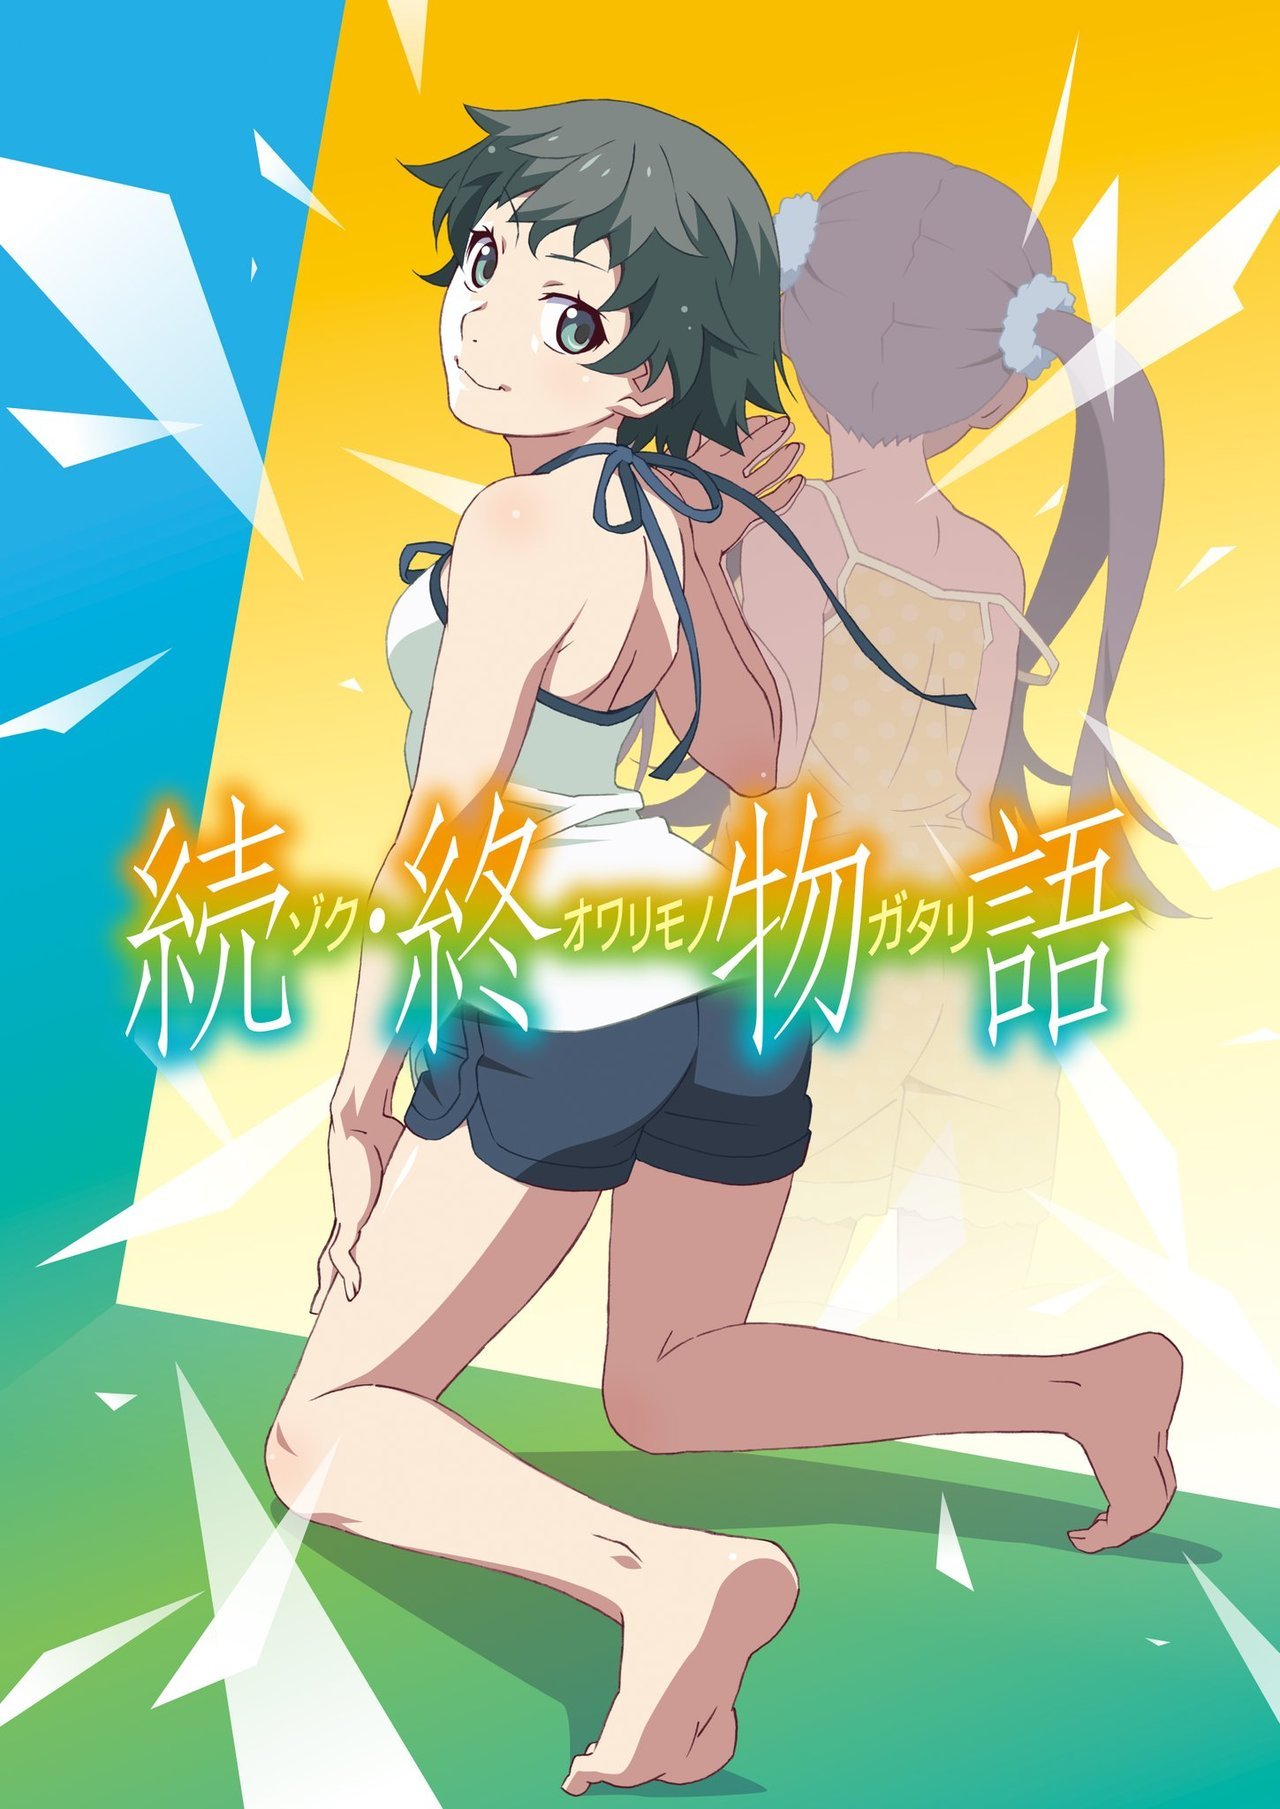 New anime key visual and PV for âZoku Owarimonogatari.â It is scheduled to have theatrical event screenings in Japan this Fall. PV: https://www.dailymotion.com/video/x6nu8lp